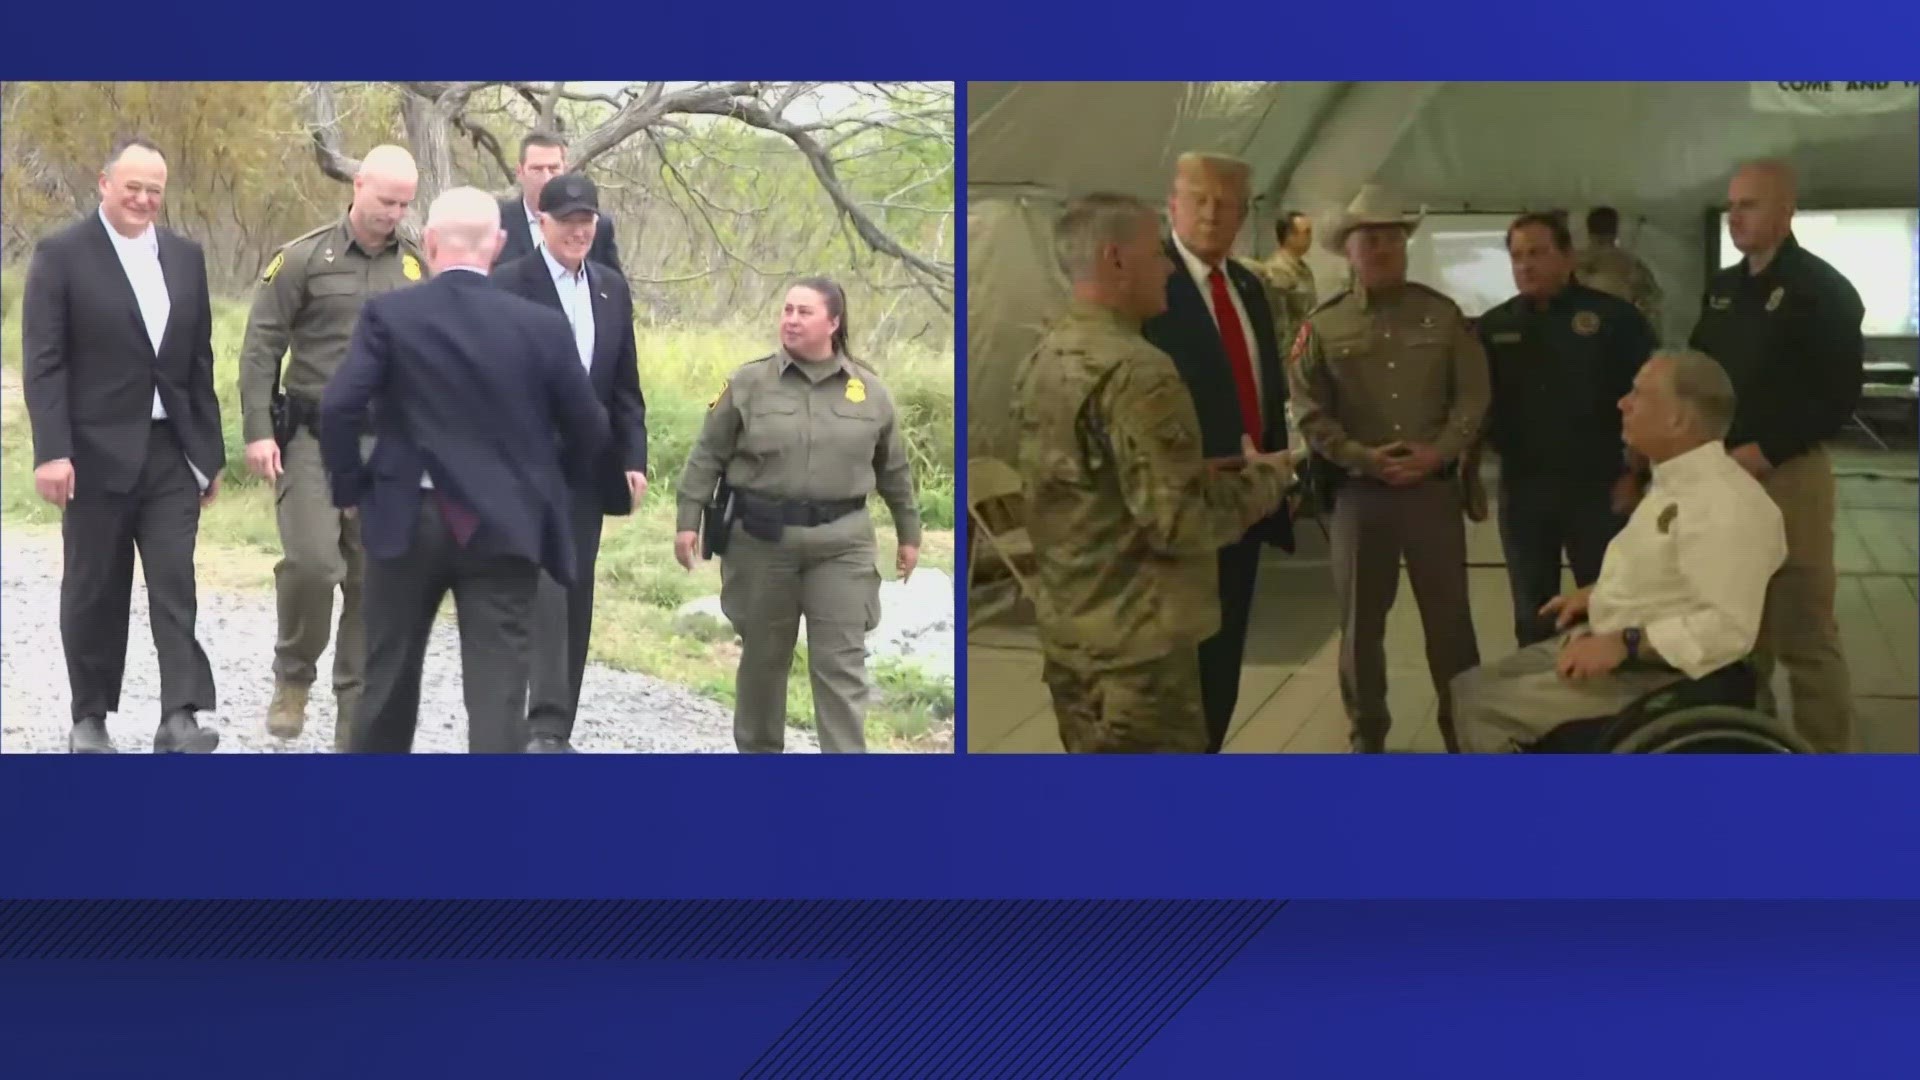 President Joe Biden made his trip to Brownsville while former President Donald Trump was joined by Governor Greg Abbott in Eagle Pass